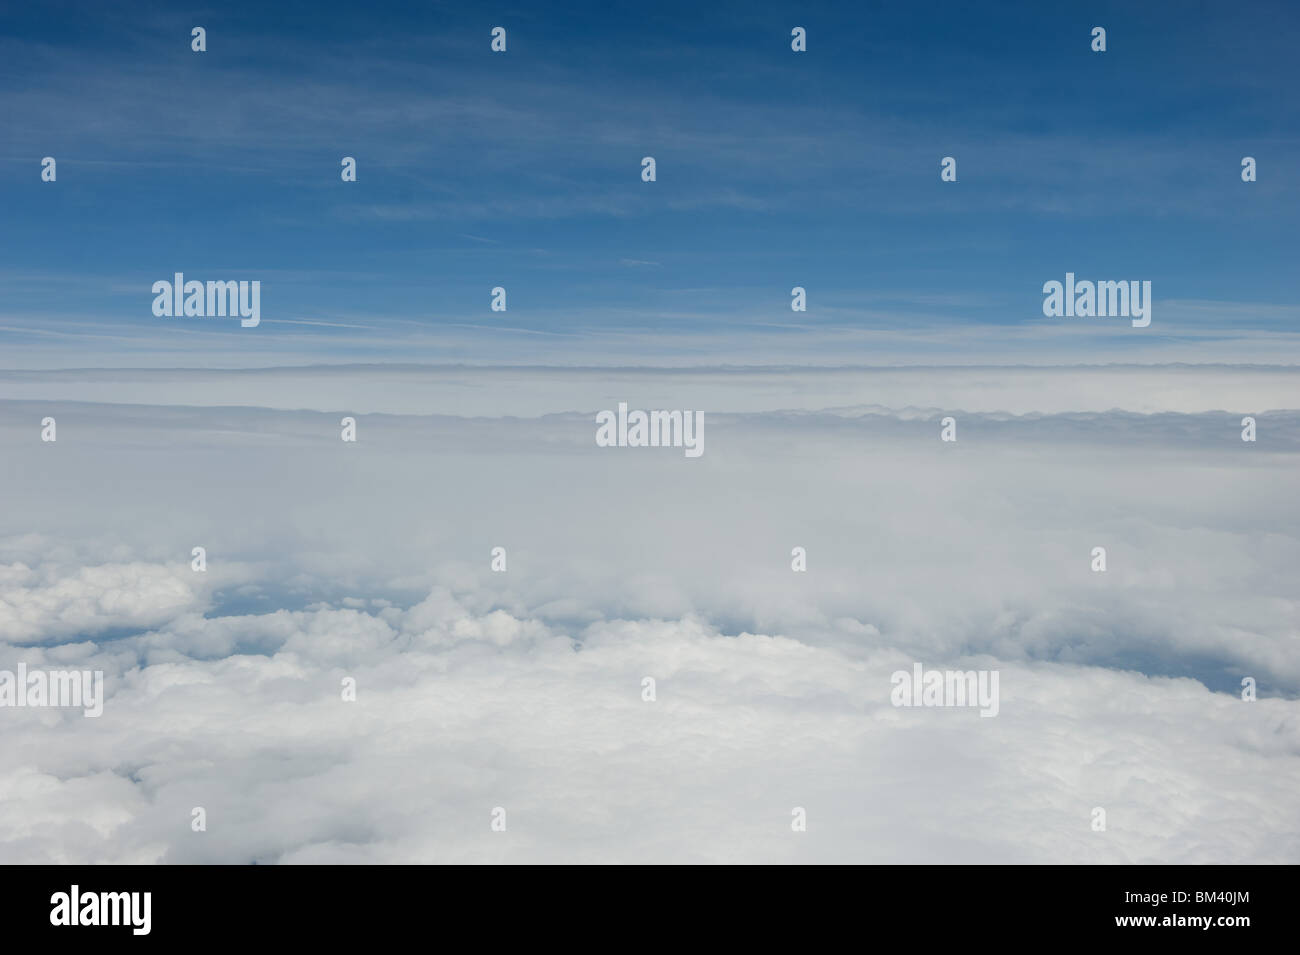 View from a passenger plane's window with blue sky and clouds, 2010 Stock Photo